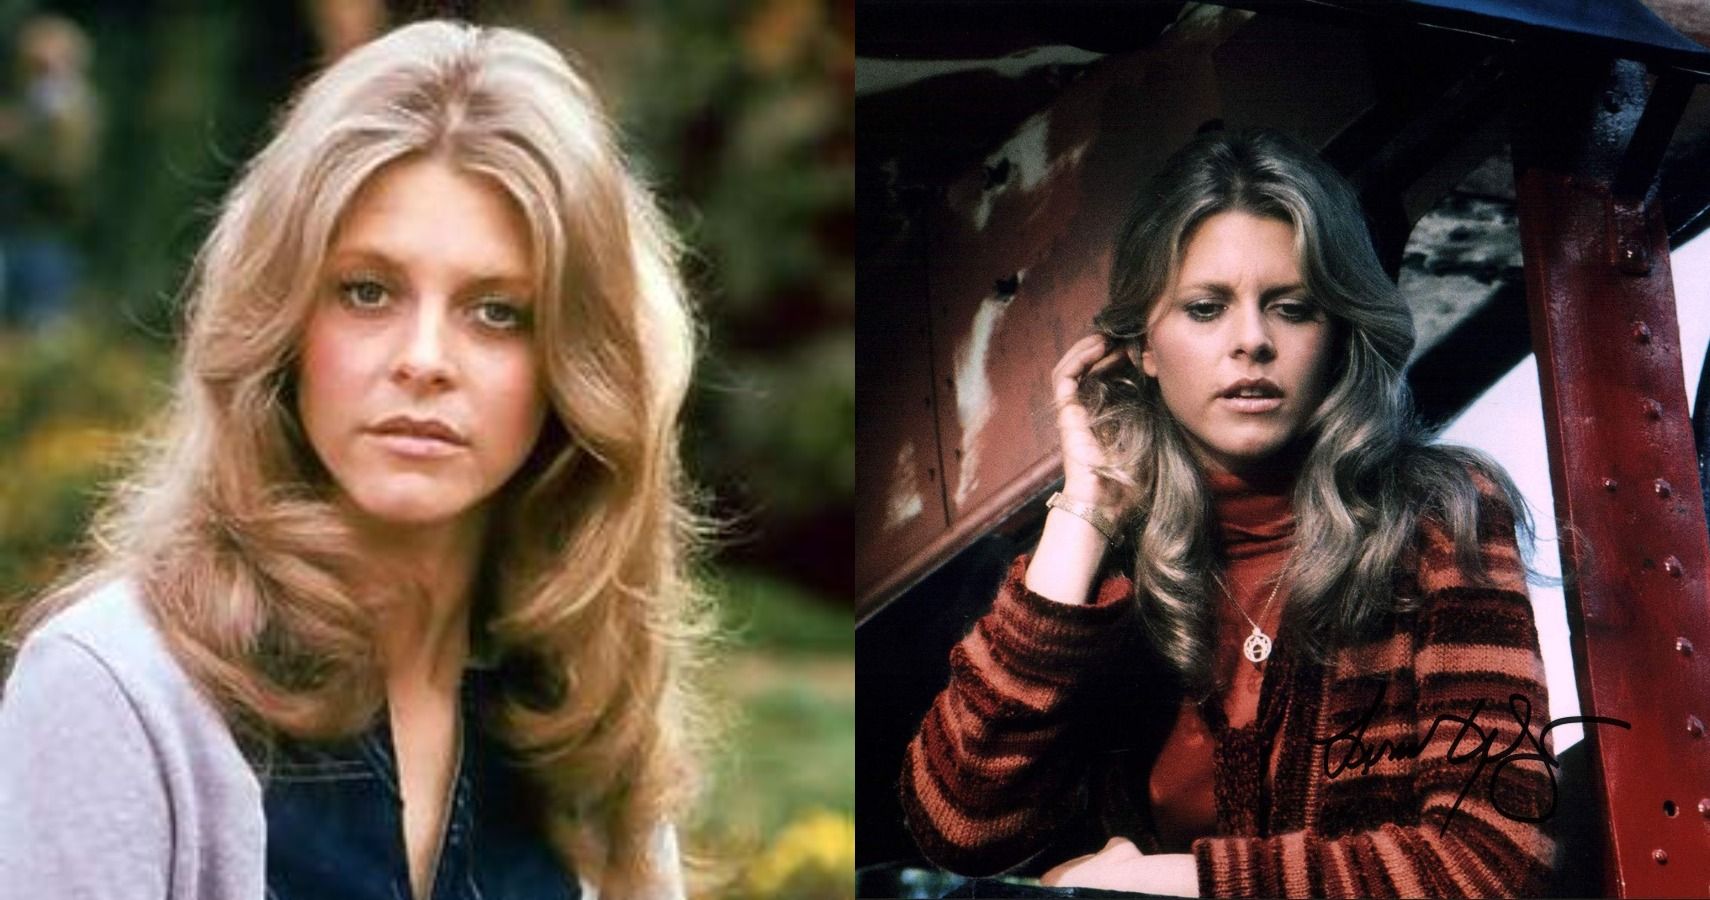 Actress starring in The Bionic Woman.